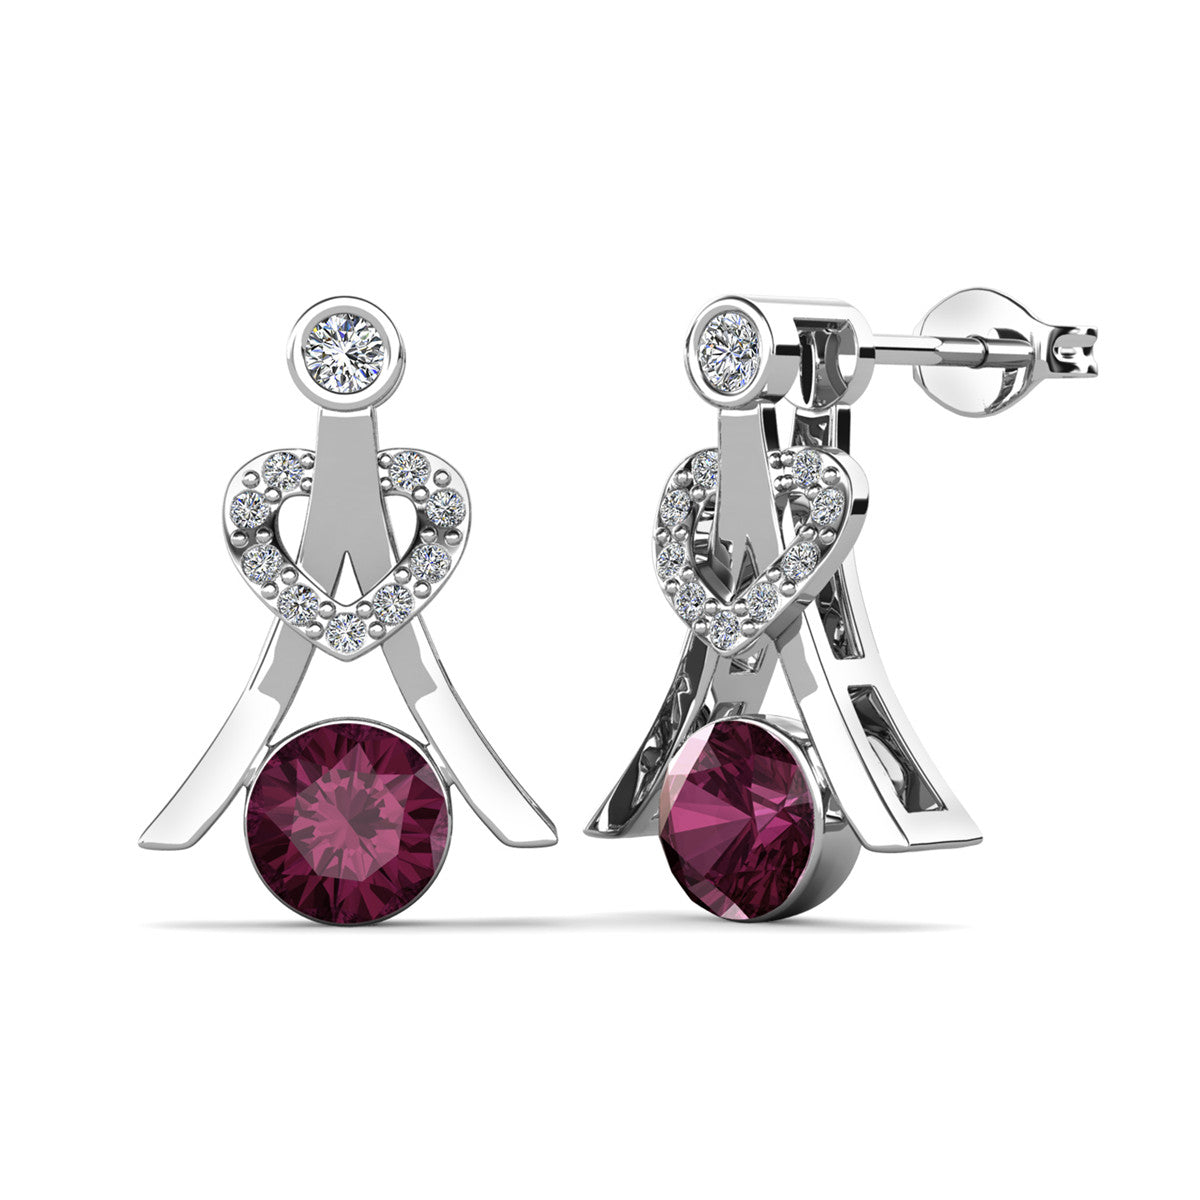 Serenity February Birthstone Amethyst Earrings, 18k White Gold Plated Silver Earrings with Round Cut Crystals